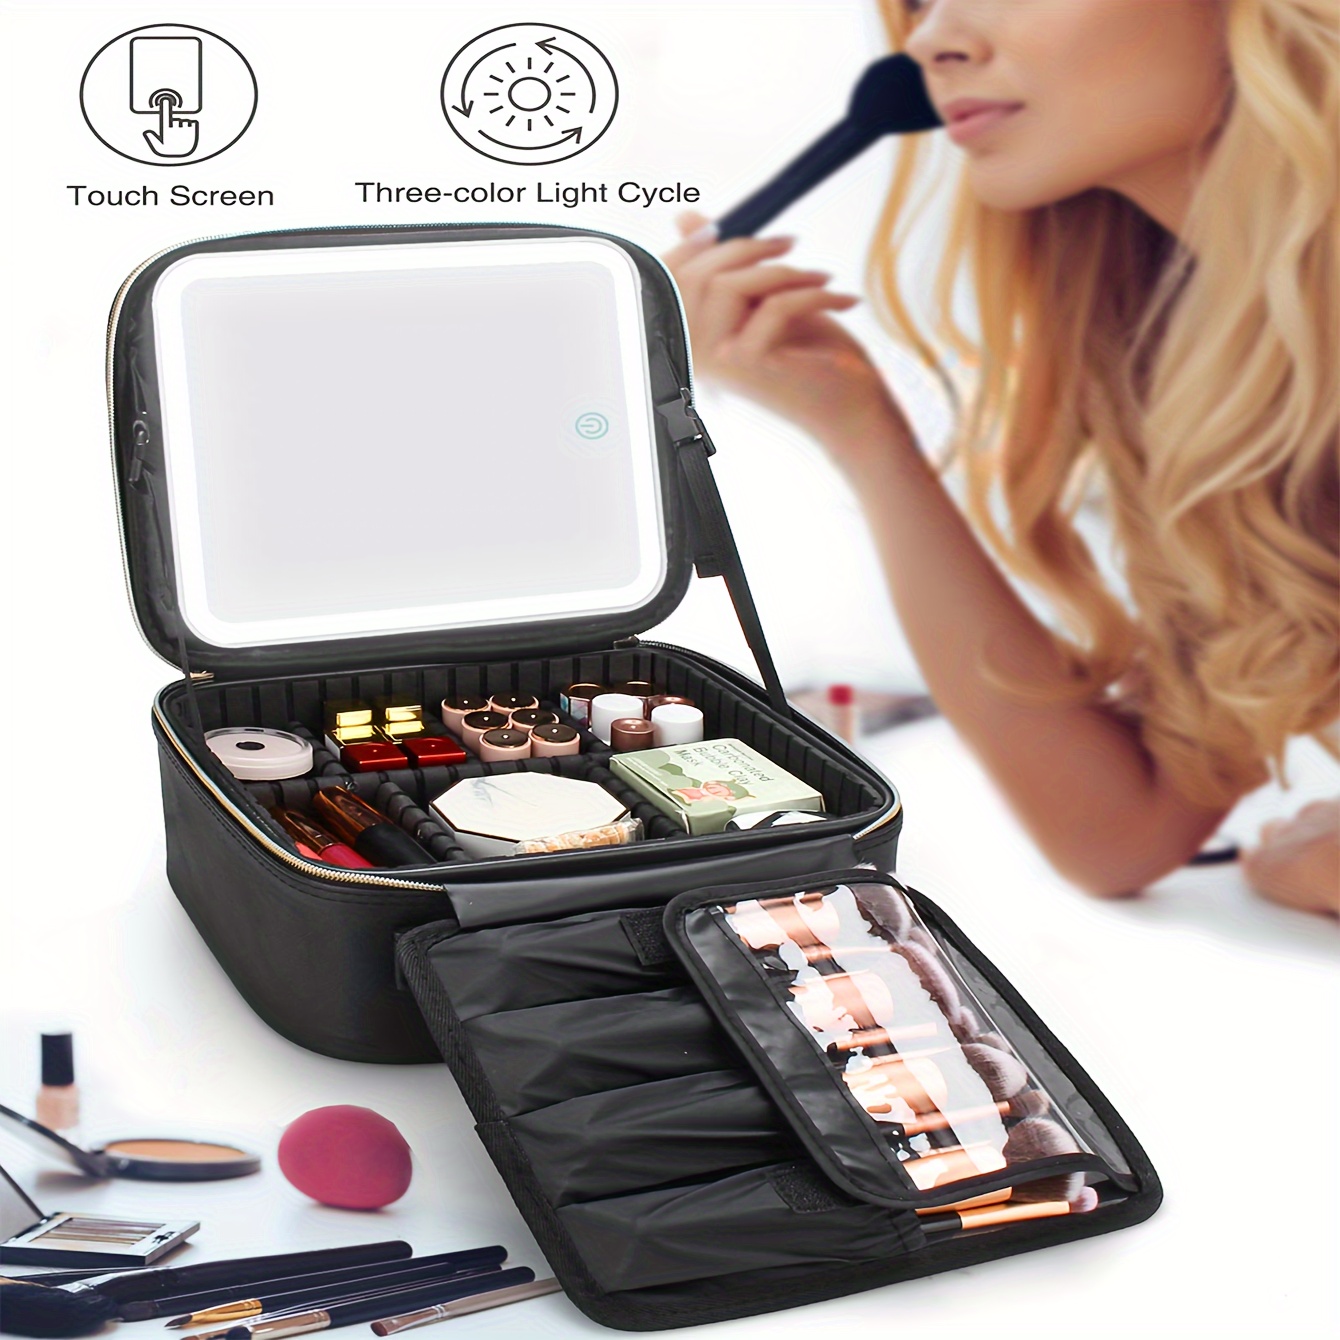 

Makeup Bag With Light Up Mirror, Makeup Case Travel Cosmetic Bags Brush Organizer Storage Box, Rechargeable Vanity Mirror With 3 Color Lights, High Frame Mirror Protection